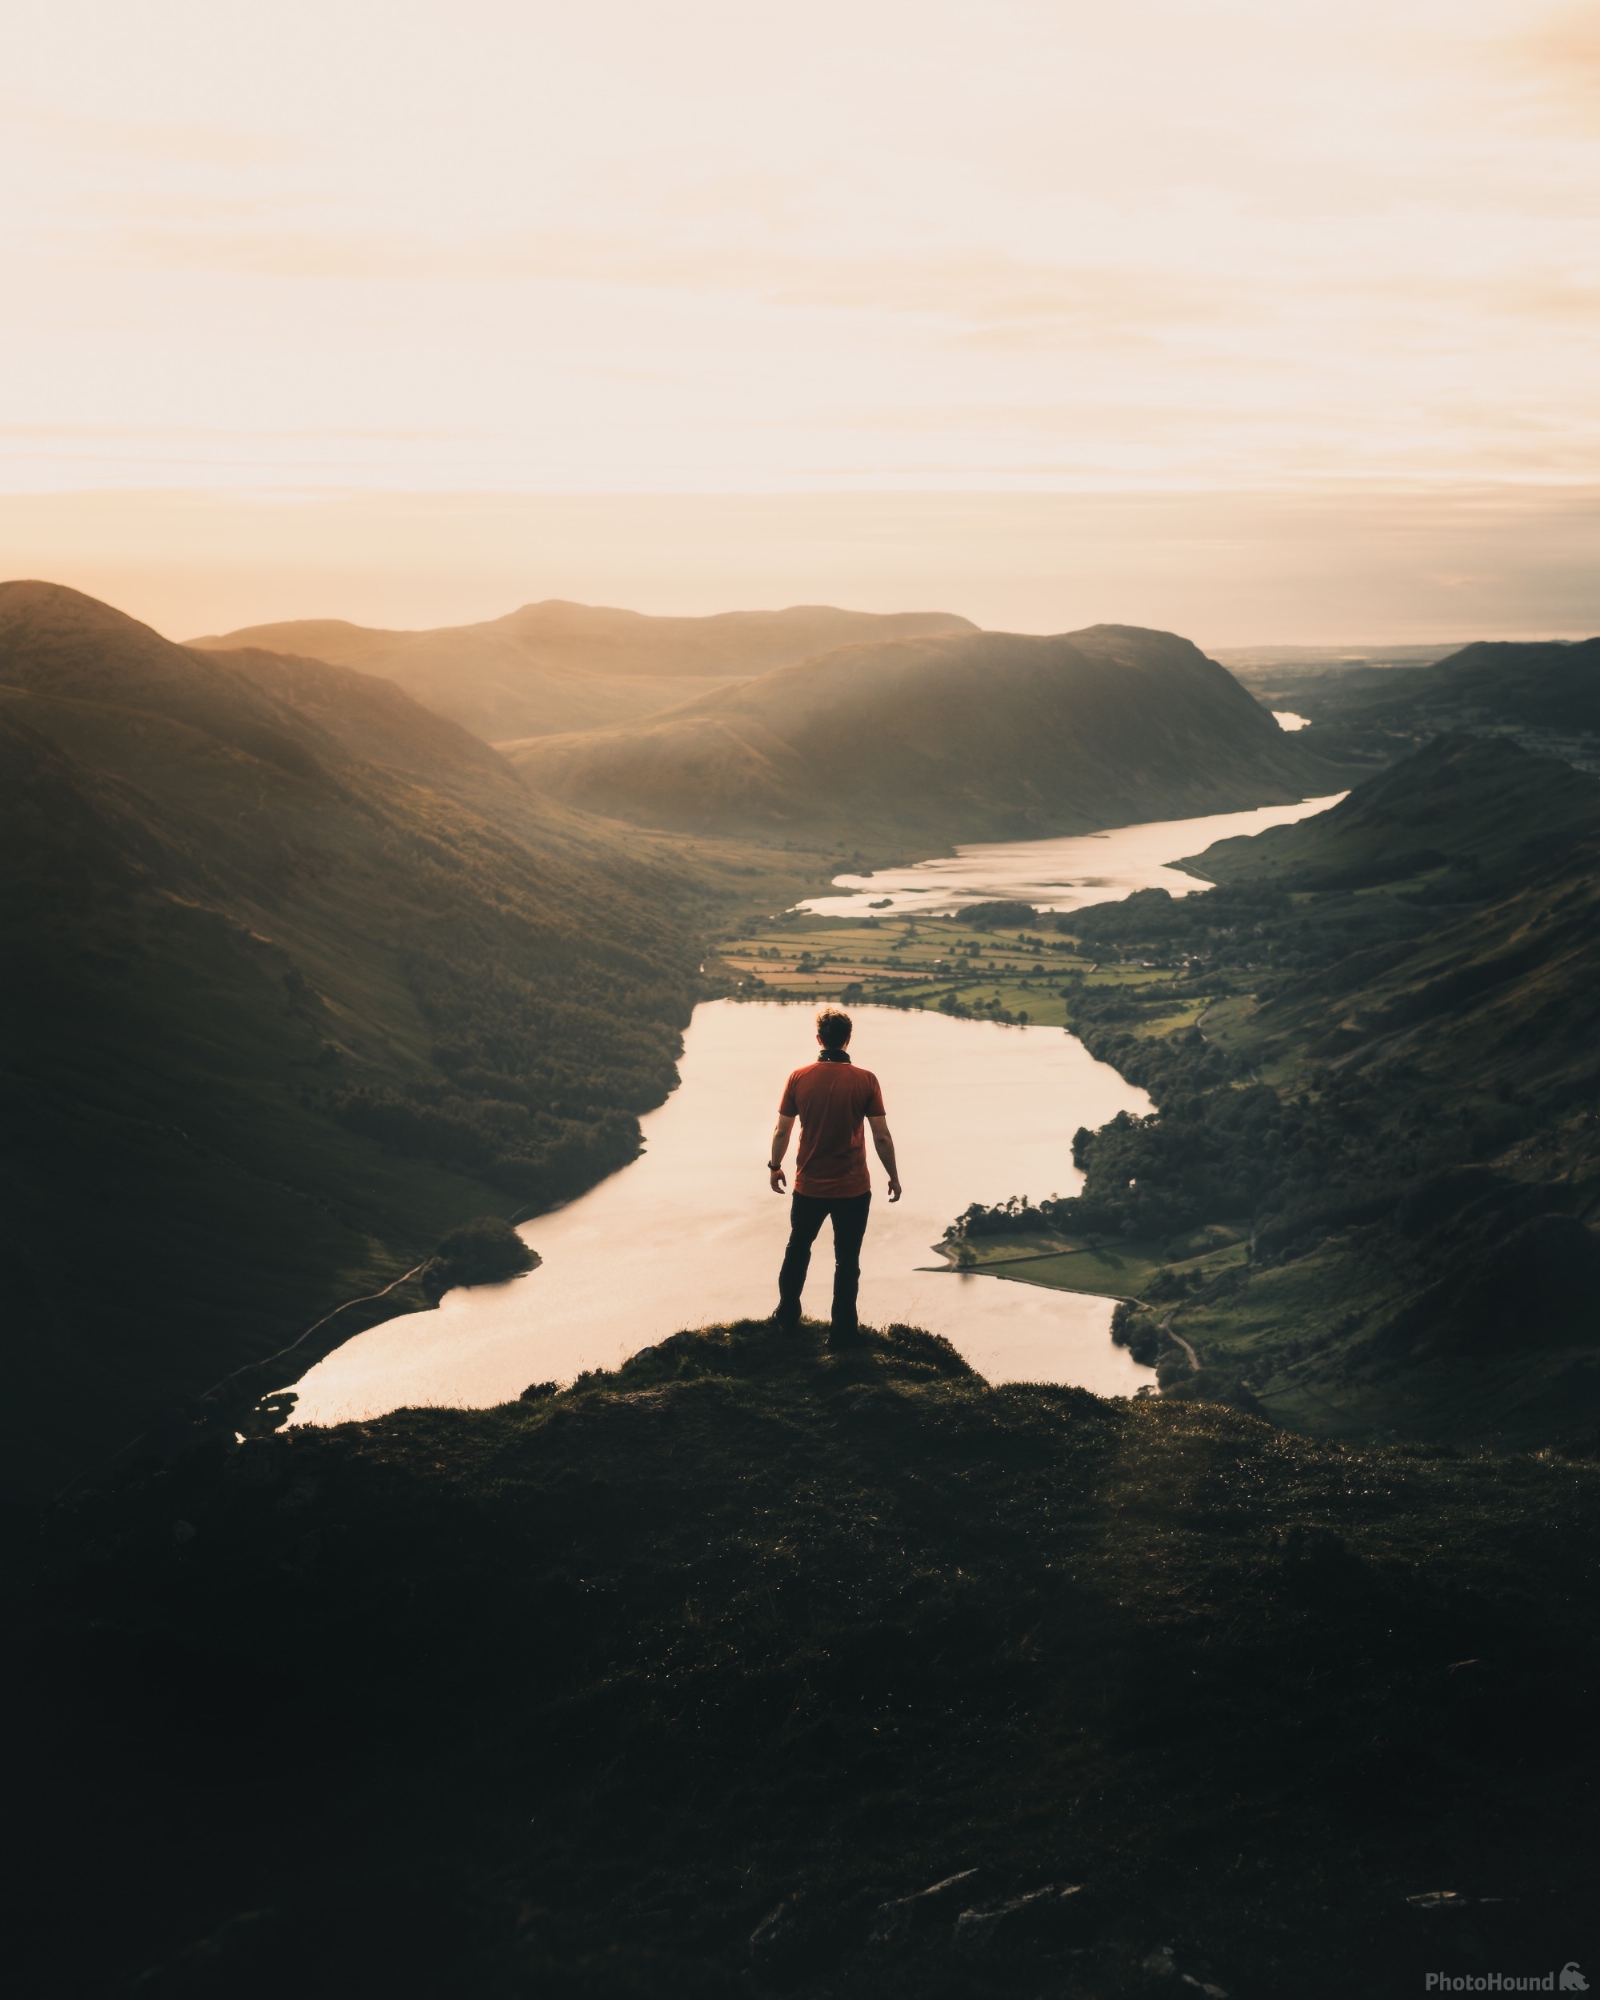 Image of View Over Buttermere and Crummock Water by Daniel Phillips